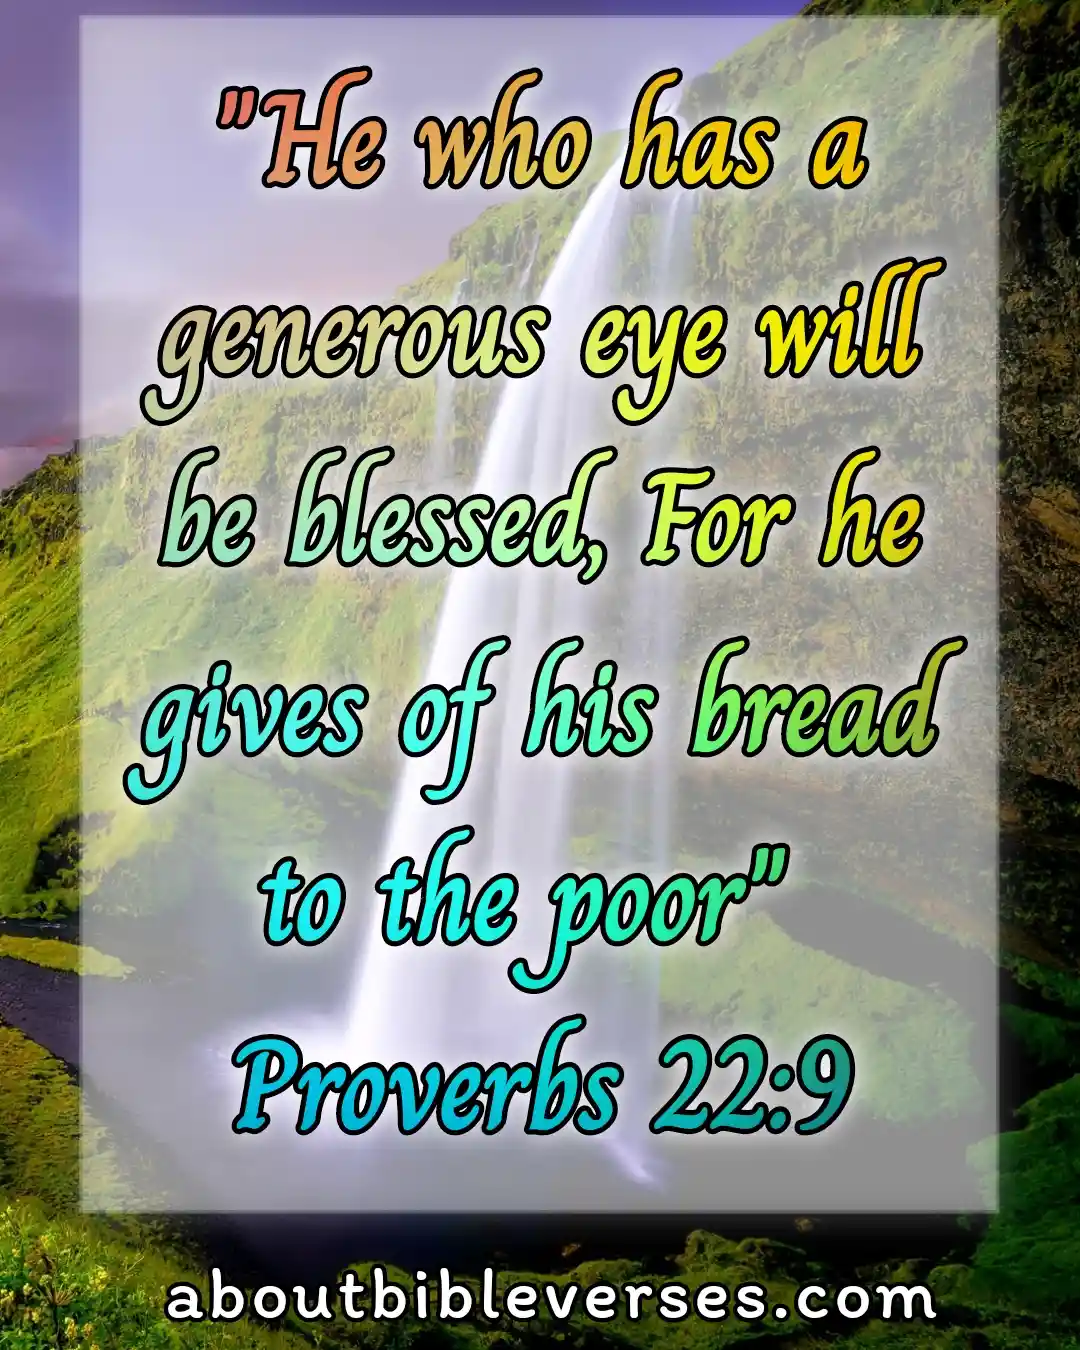 Bible Verses About Serving Others (Proverbs 22:9)